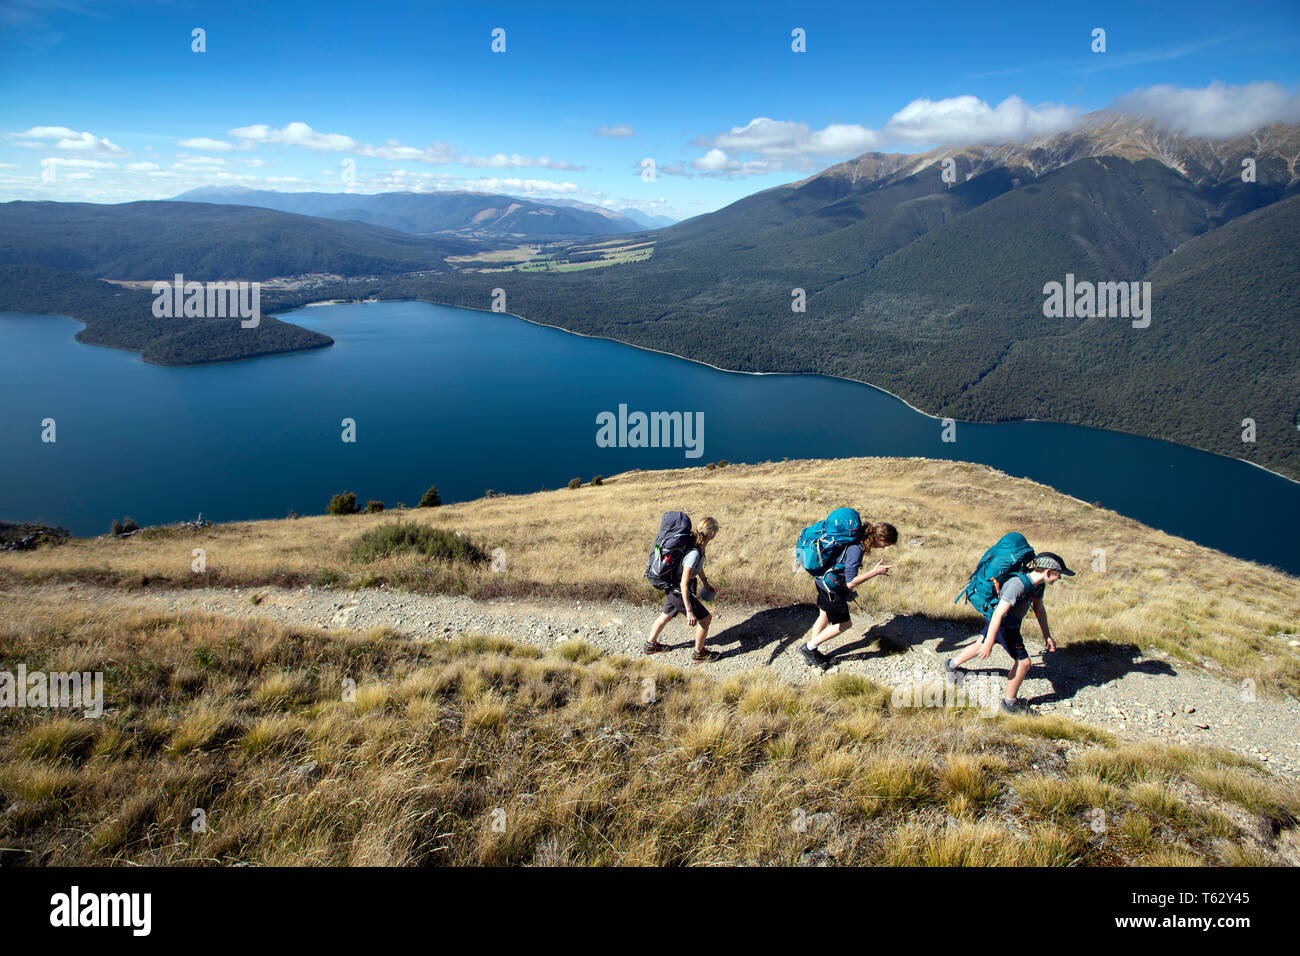 Picture by Tim Cuff - 23/24 March 2018 - Tramping on Mount Roberts, Nelson, New Zealand Stock Photo